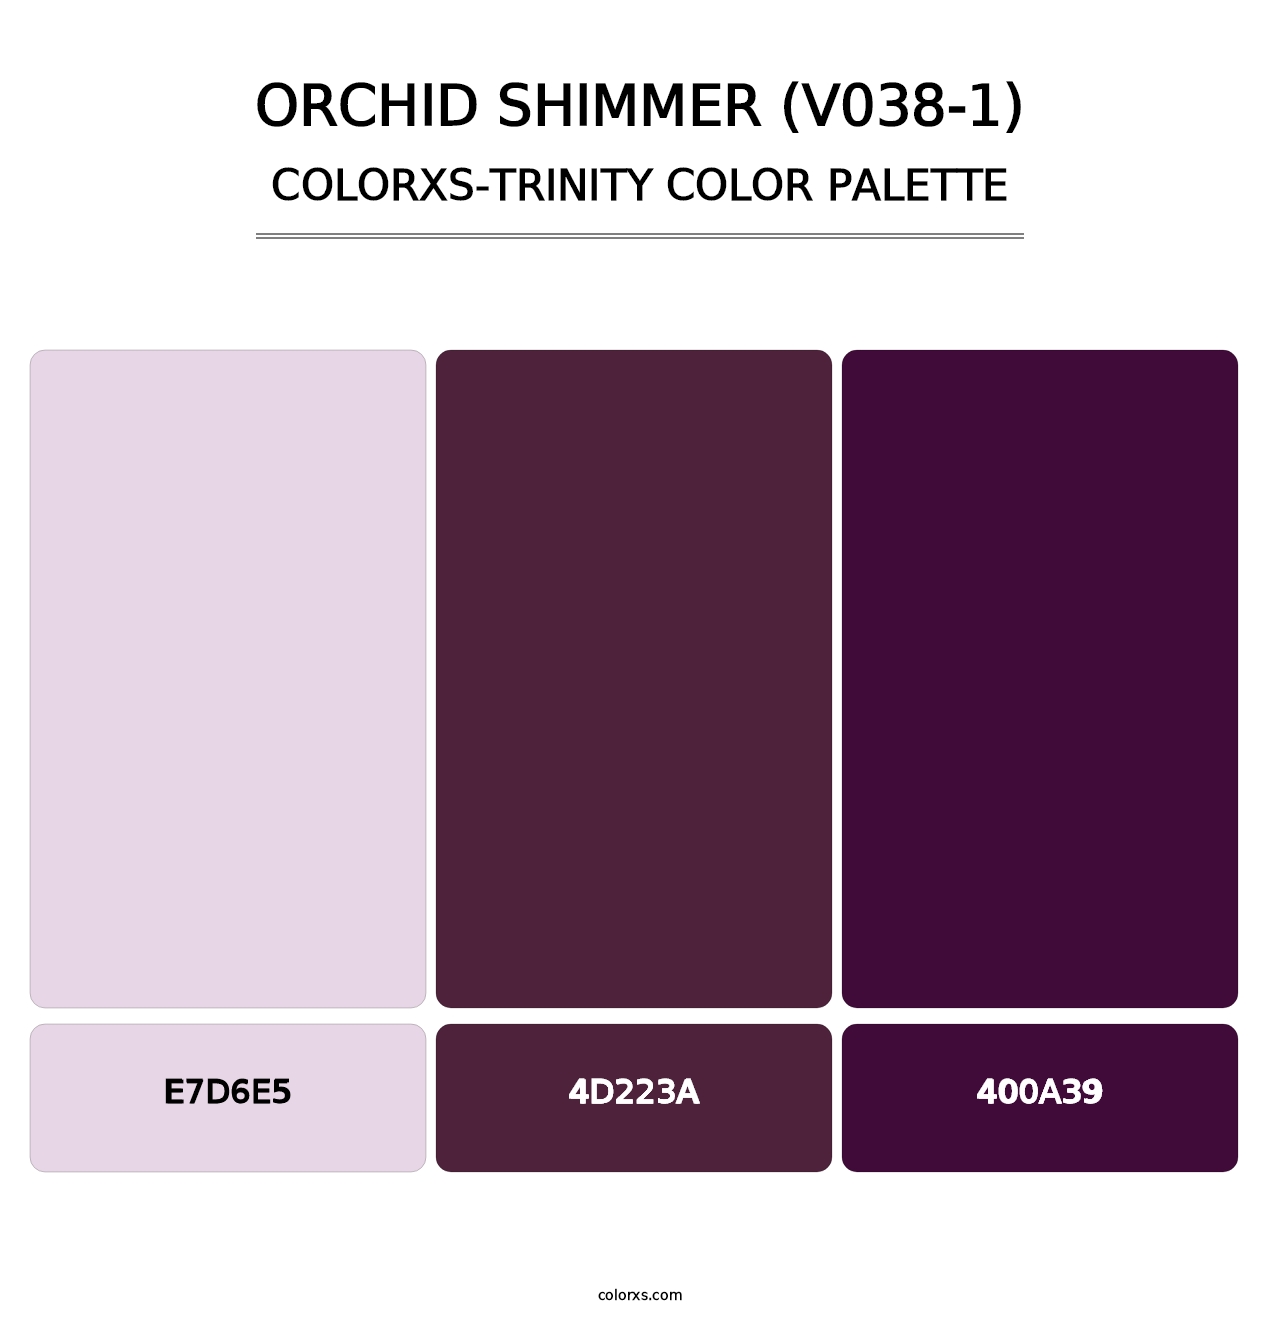 Orchid Shimmer (V038-1) - Colorxs Trinity Palette